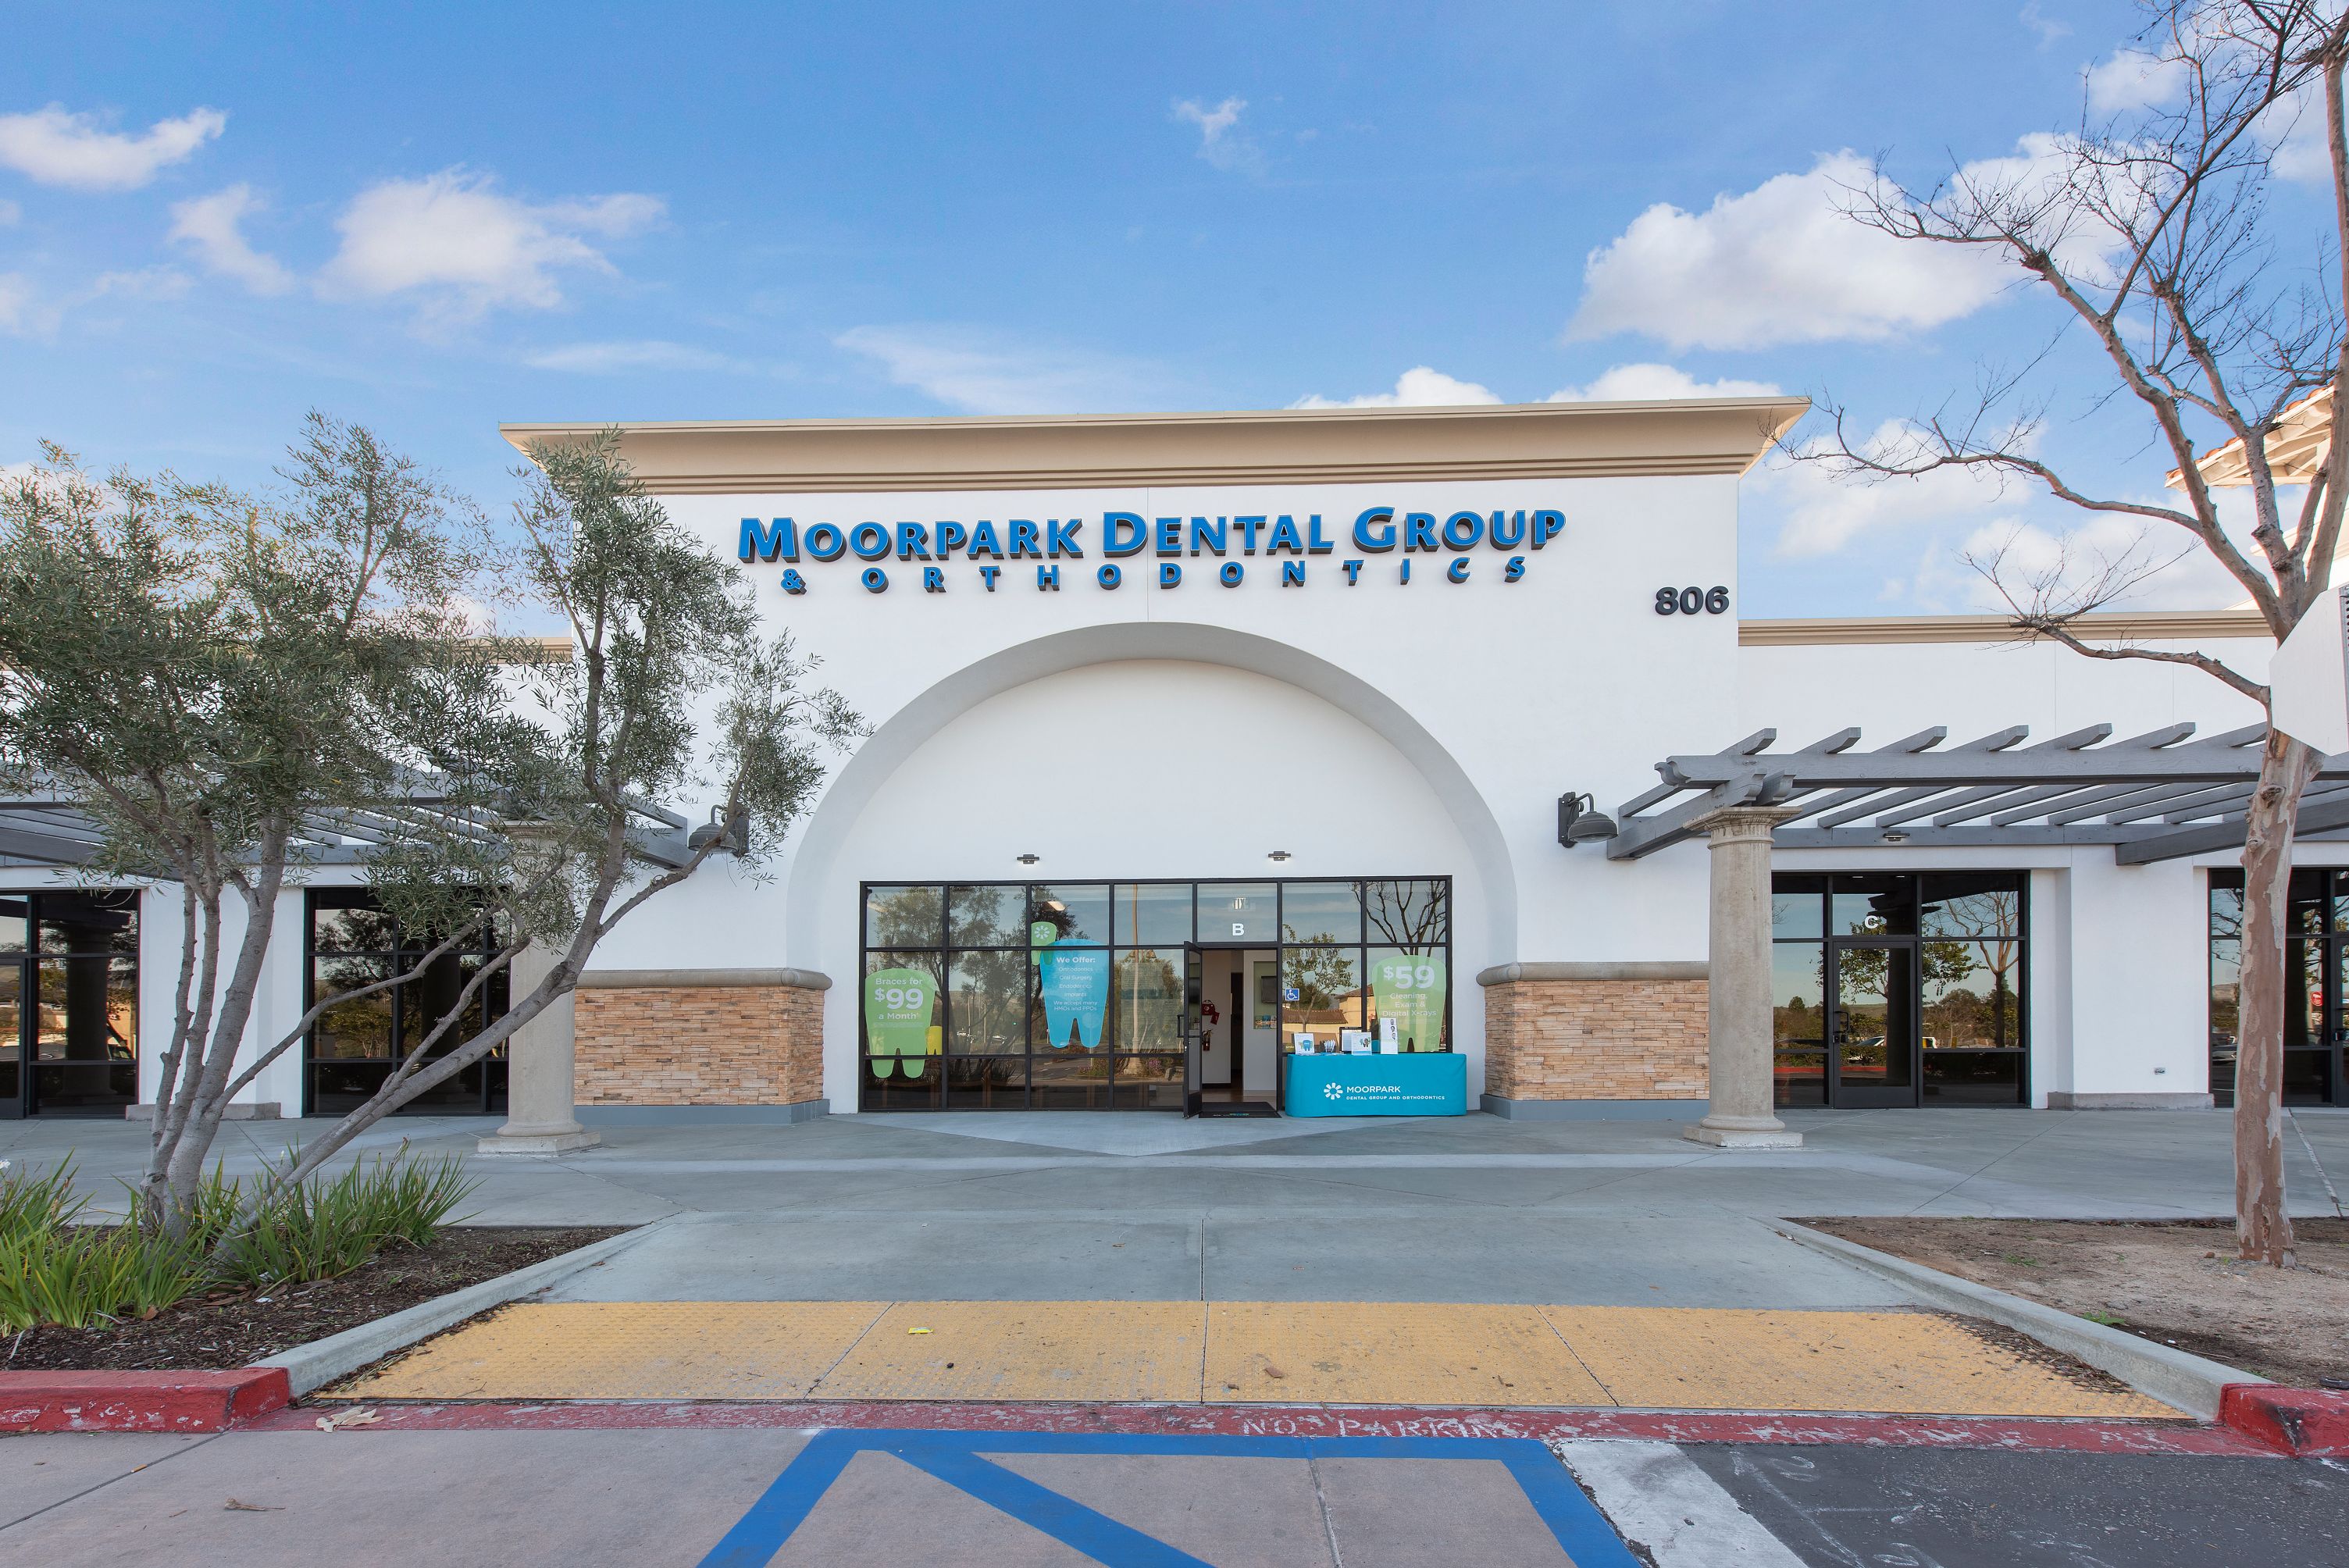 Looking for a family dentist in Moorpark, CA? You have come to the right spot!